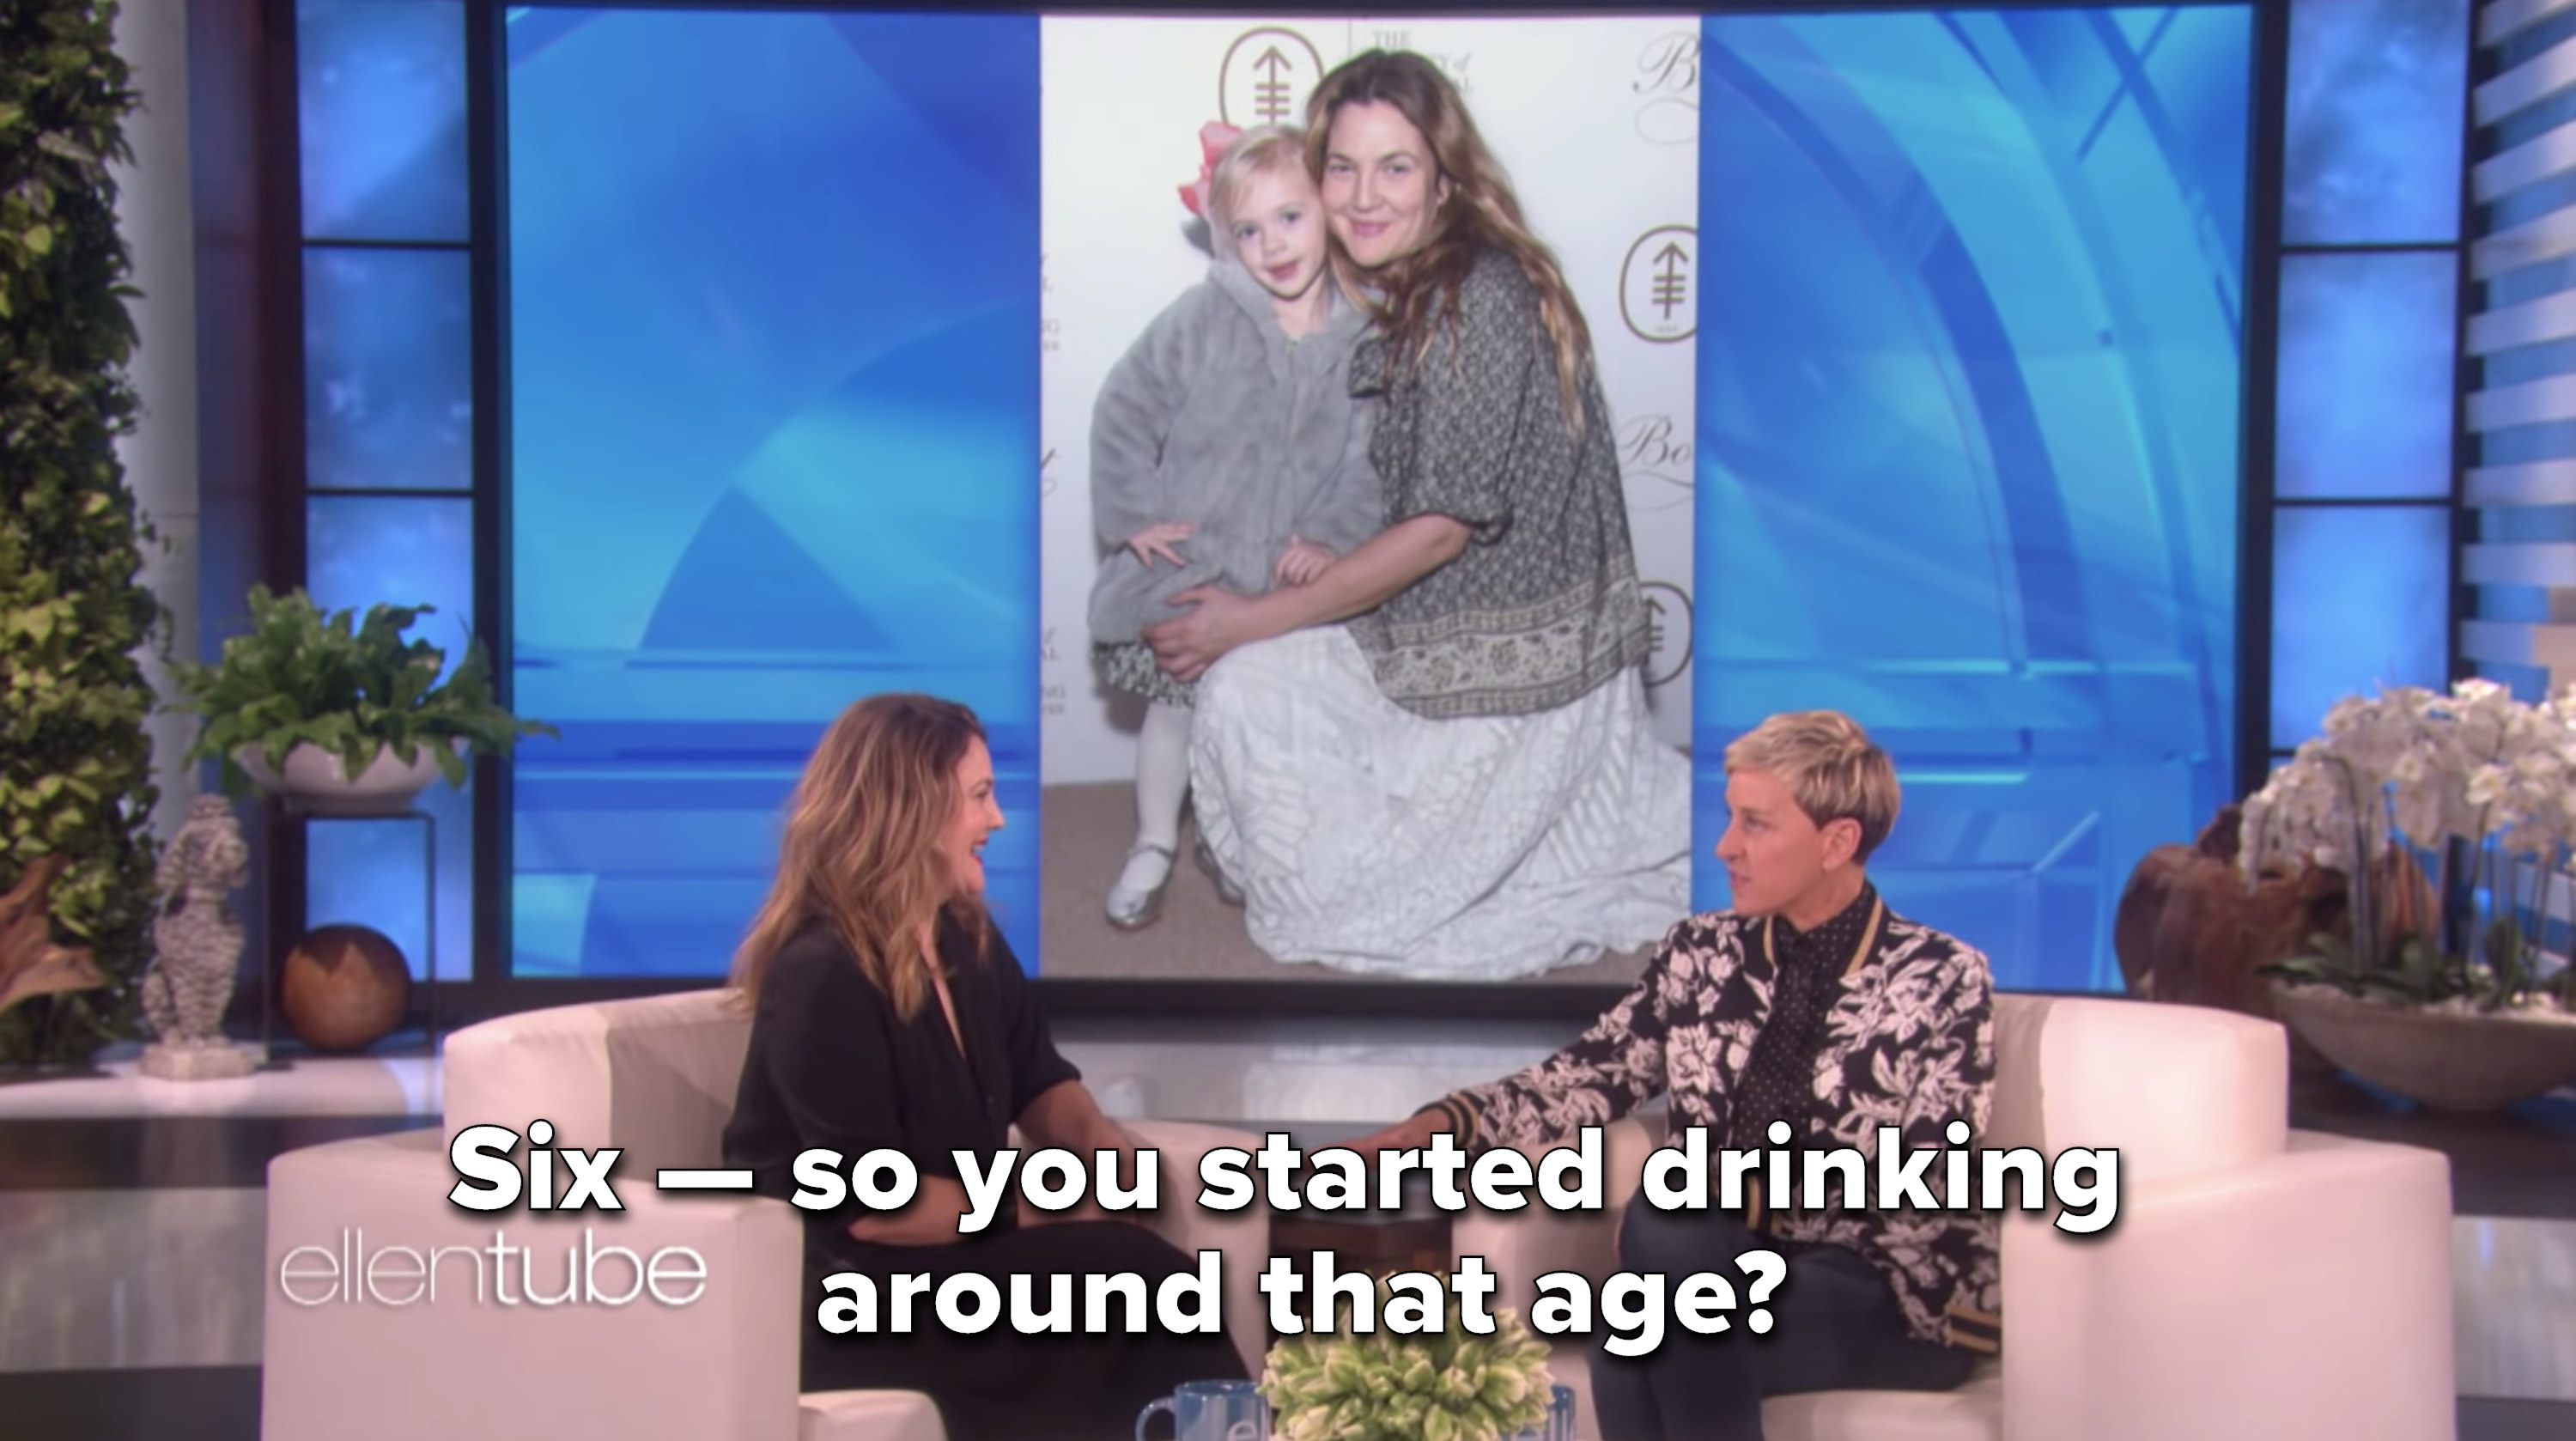 She said, &quot;Six — so you started drinking around that age?&quot;